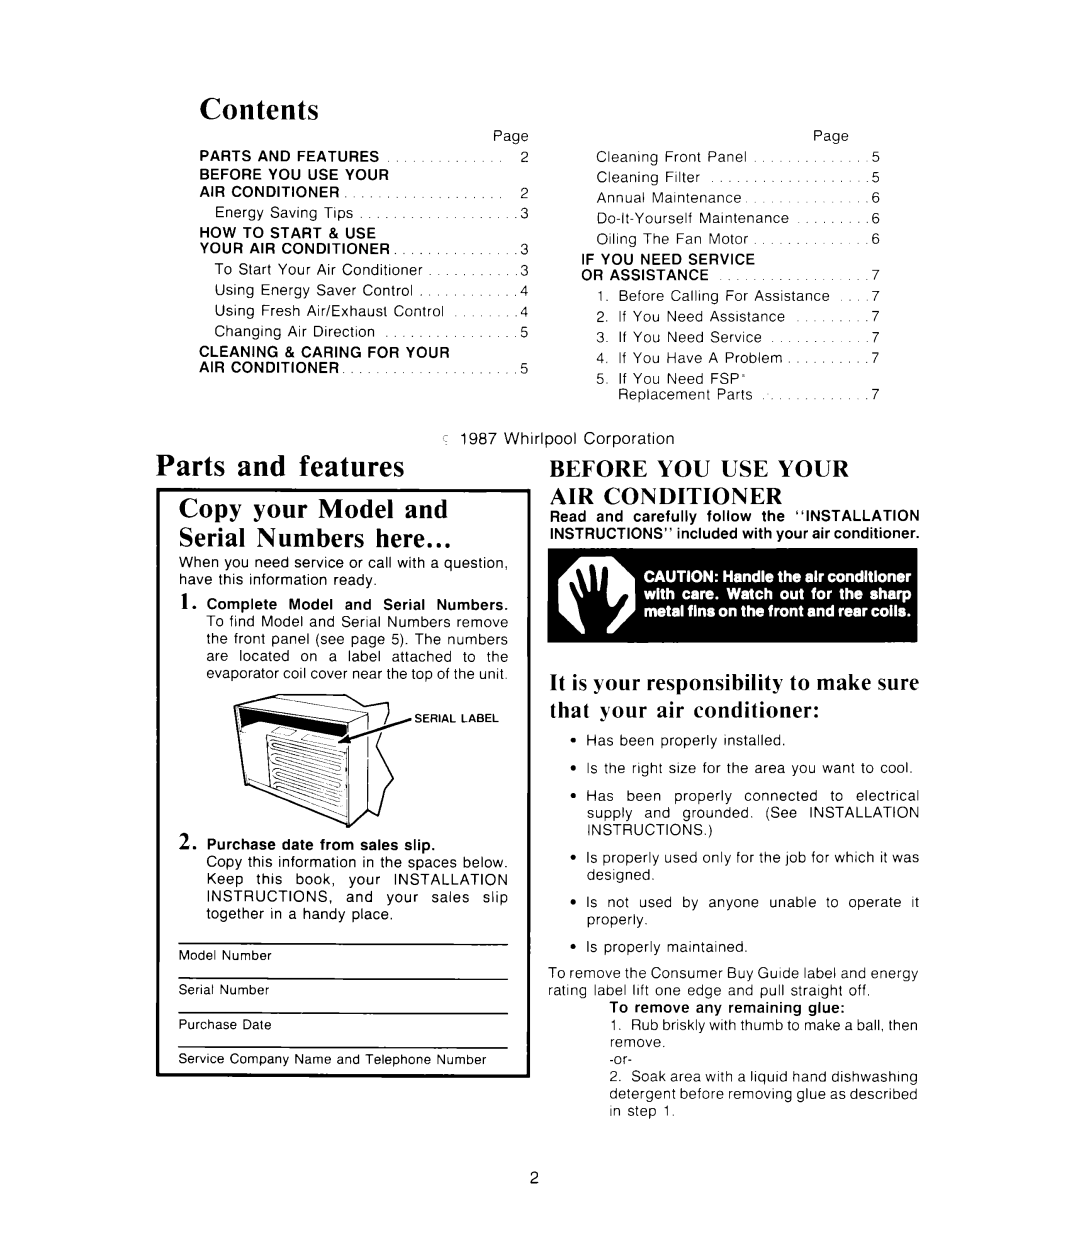 Whirlpool AC1 352 manual Contents, Parts and features, Copy your Model and Serial Numbers here 